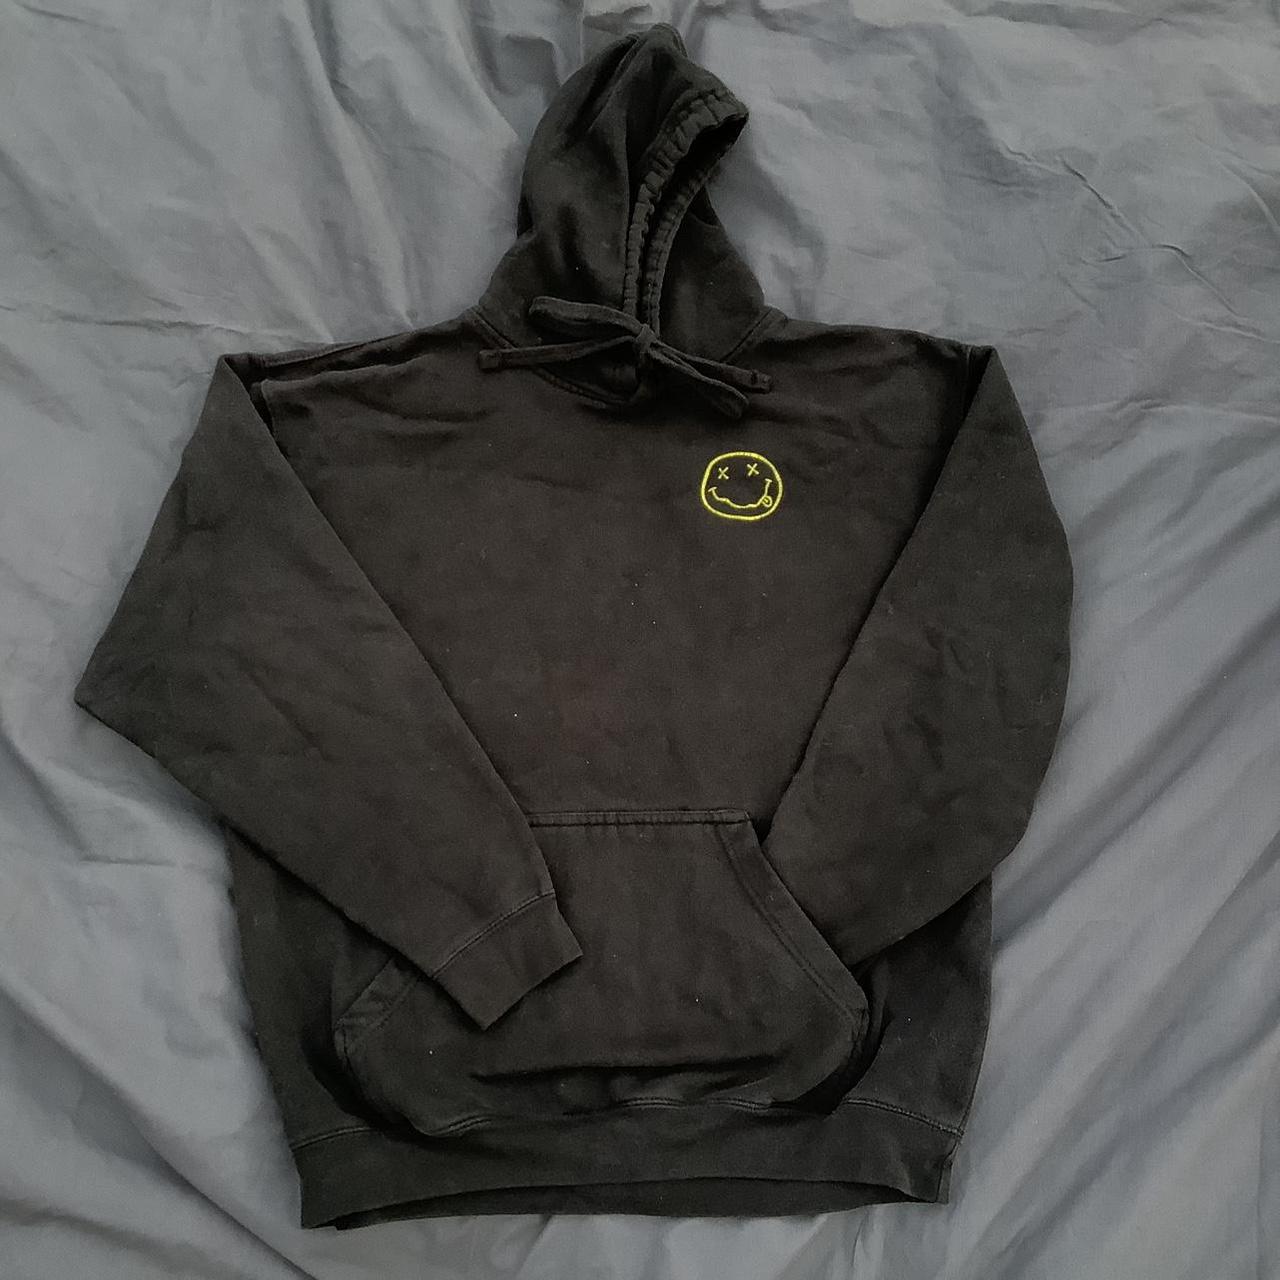 Urban Outfitters Men's Black and Yellow Hoodie (2)